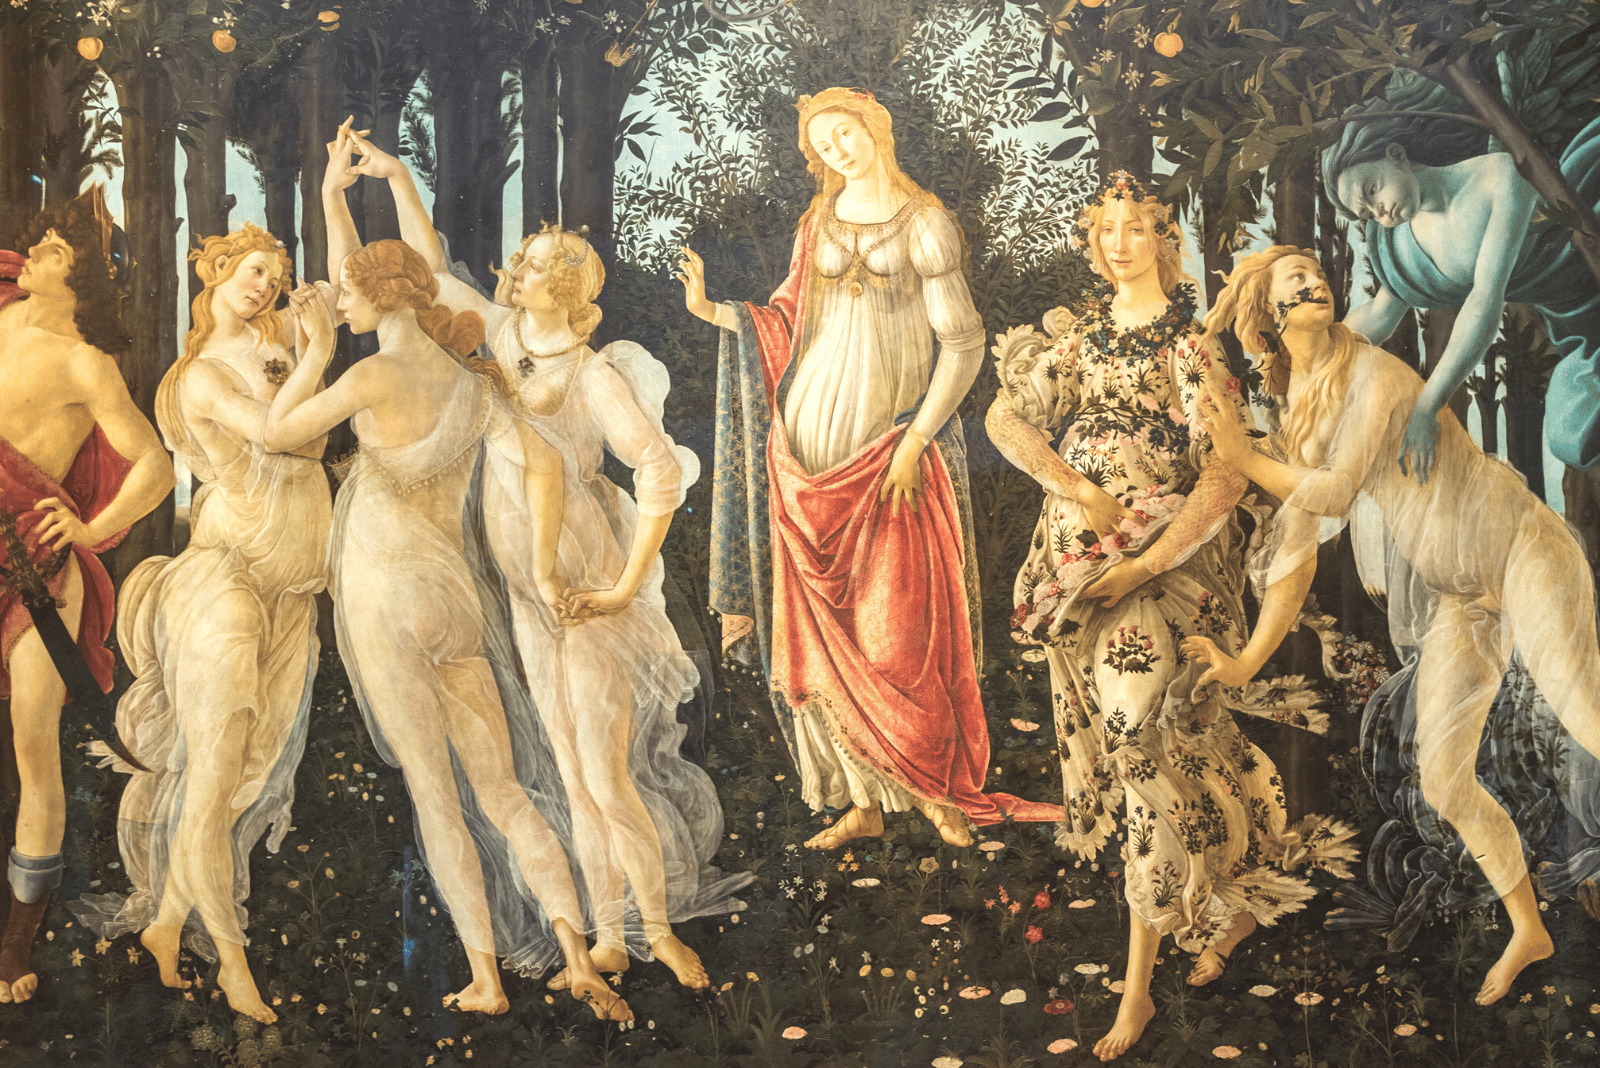 Alessandro Botticelli, Spring 1460, Renaissance Art at the Ufizzi Gallery in Florence